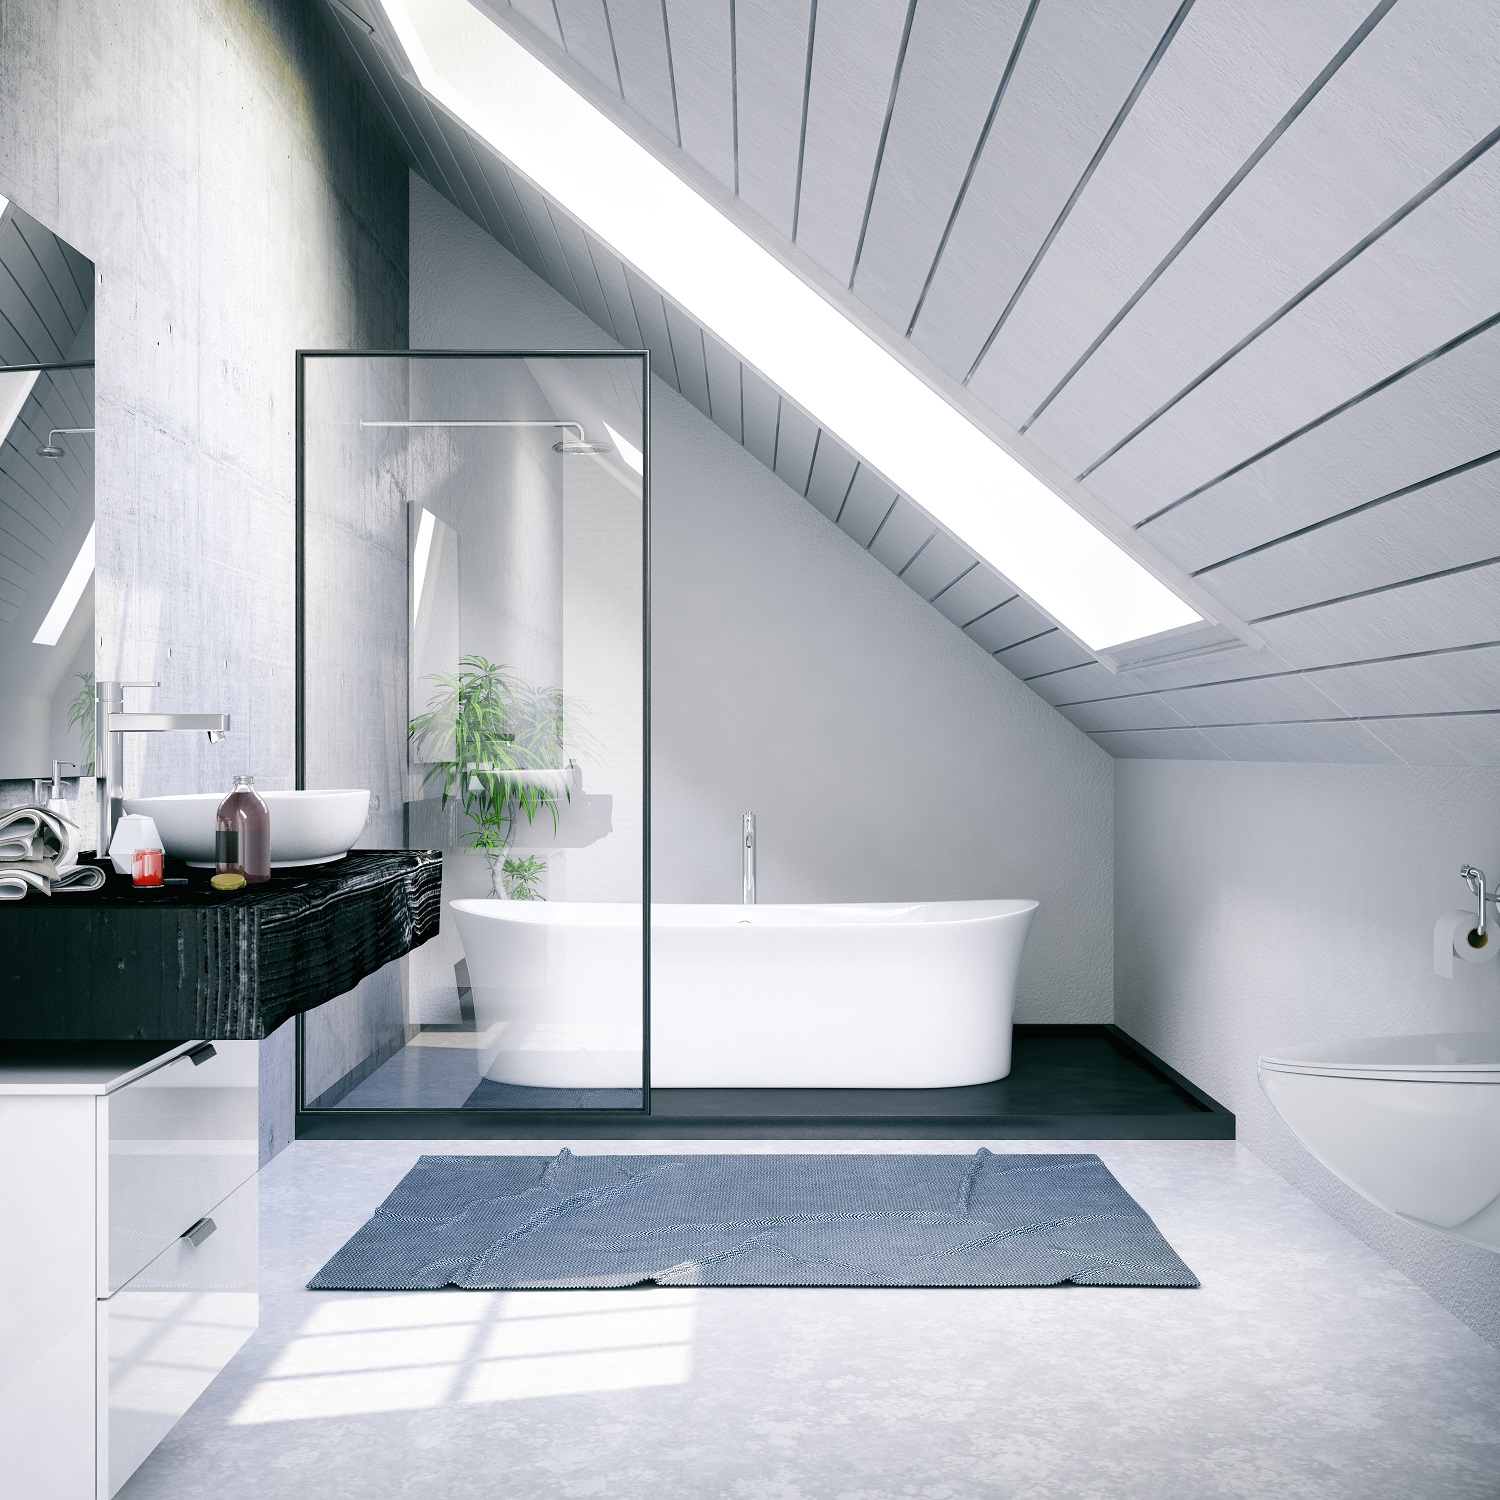 Lifestyle image of an attic bathroom with white floors and walls, a raised platform with a freestanding bat and wall mounted showerhead, a white wall mounted vanity unit, painted black wooden countertop, washbasin and wall mounted toilet with concealed cistern